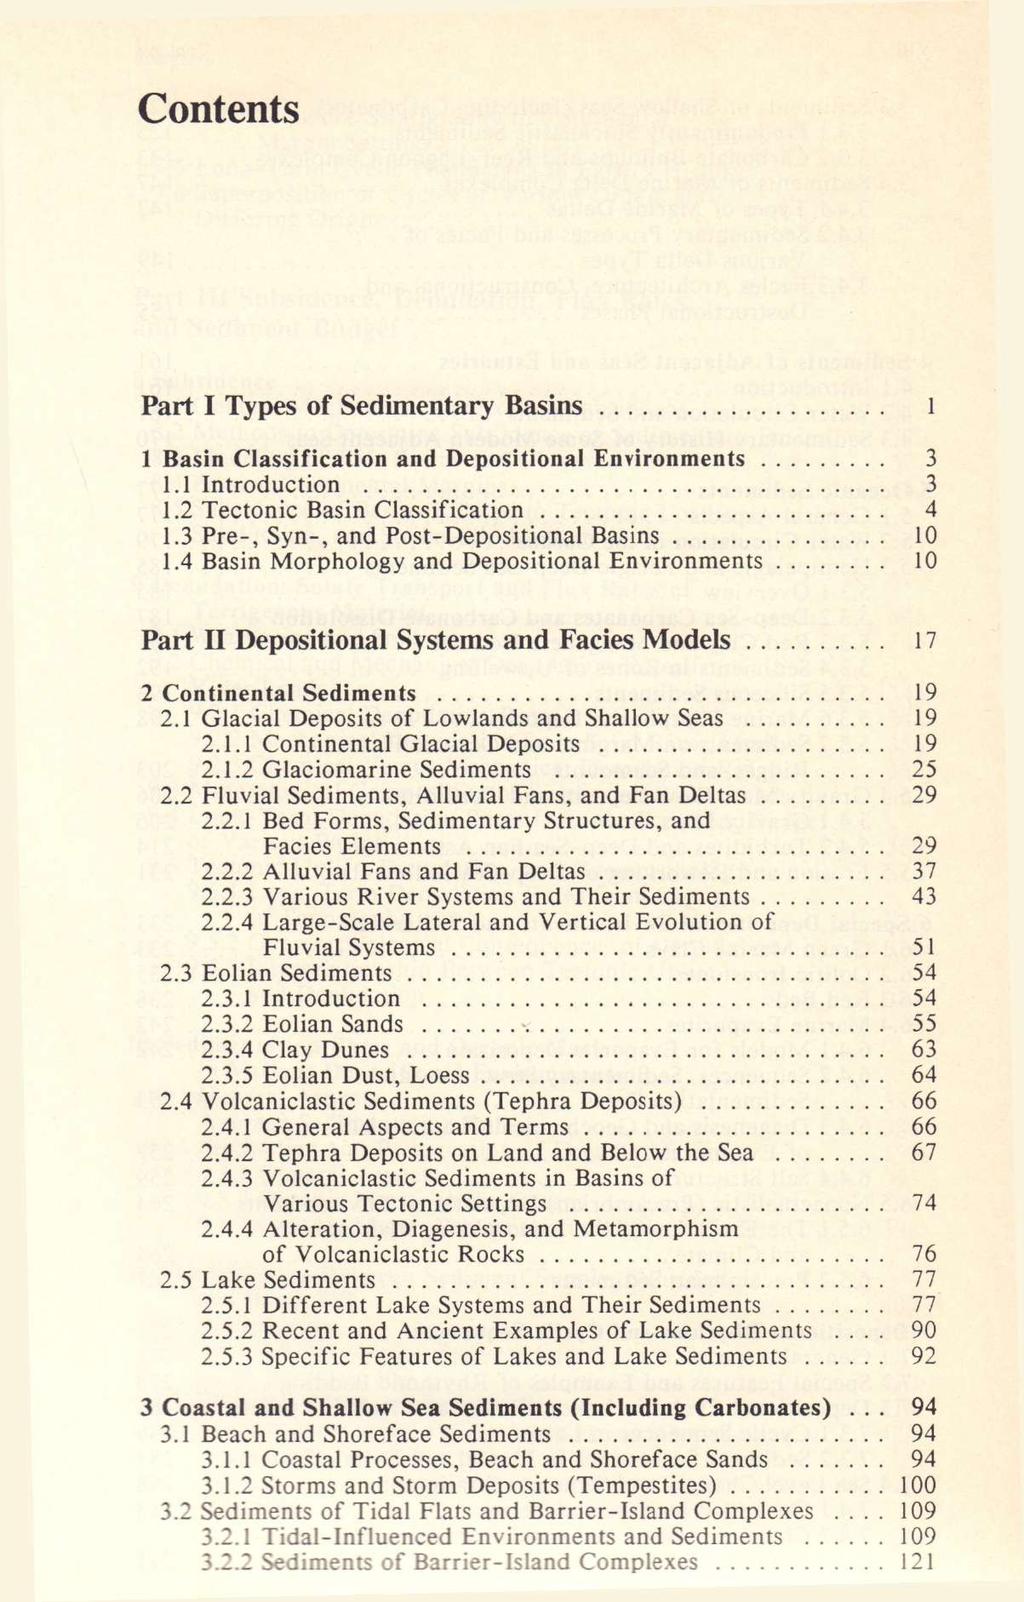 Contents Part I Types of Sedimentary Basins 1 Basin Classification and Depositional Environments 3 1.1 Introduction 3 1.2 Tectonic Basin Classification 4 1.